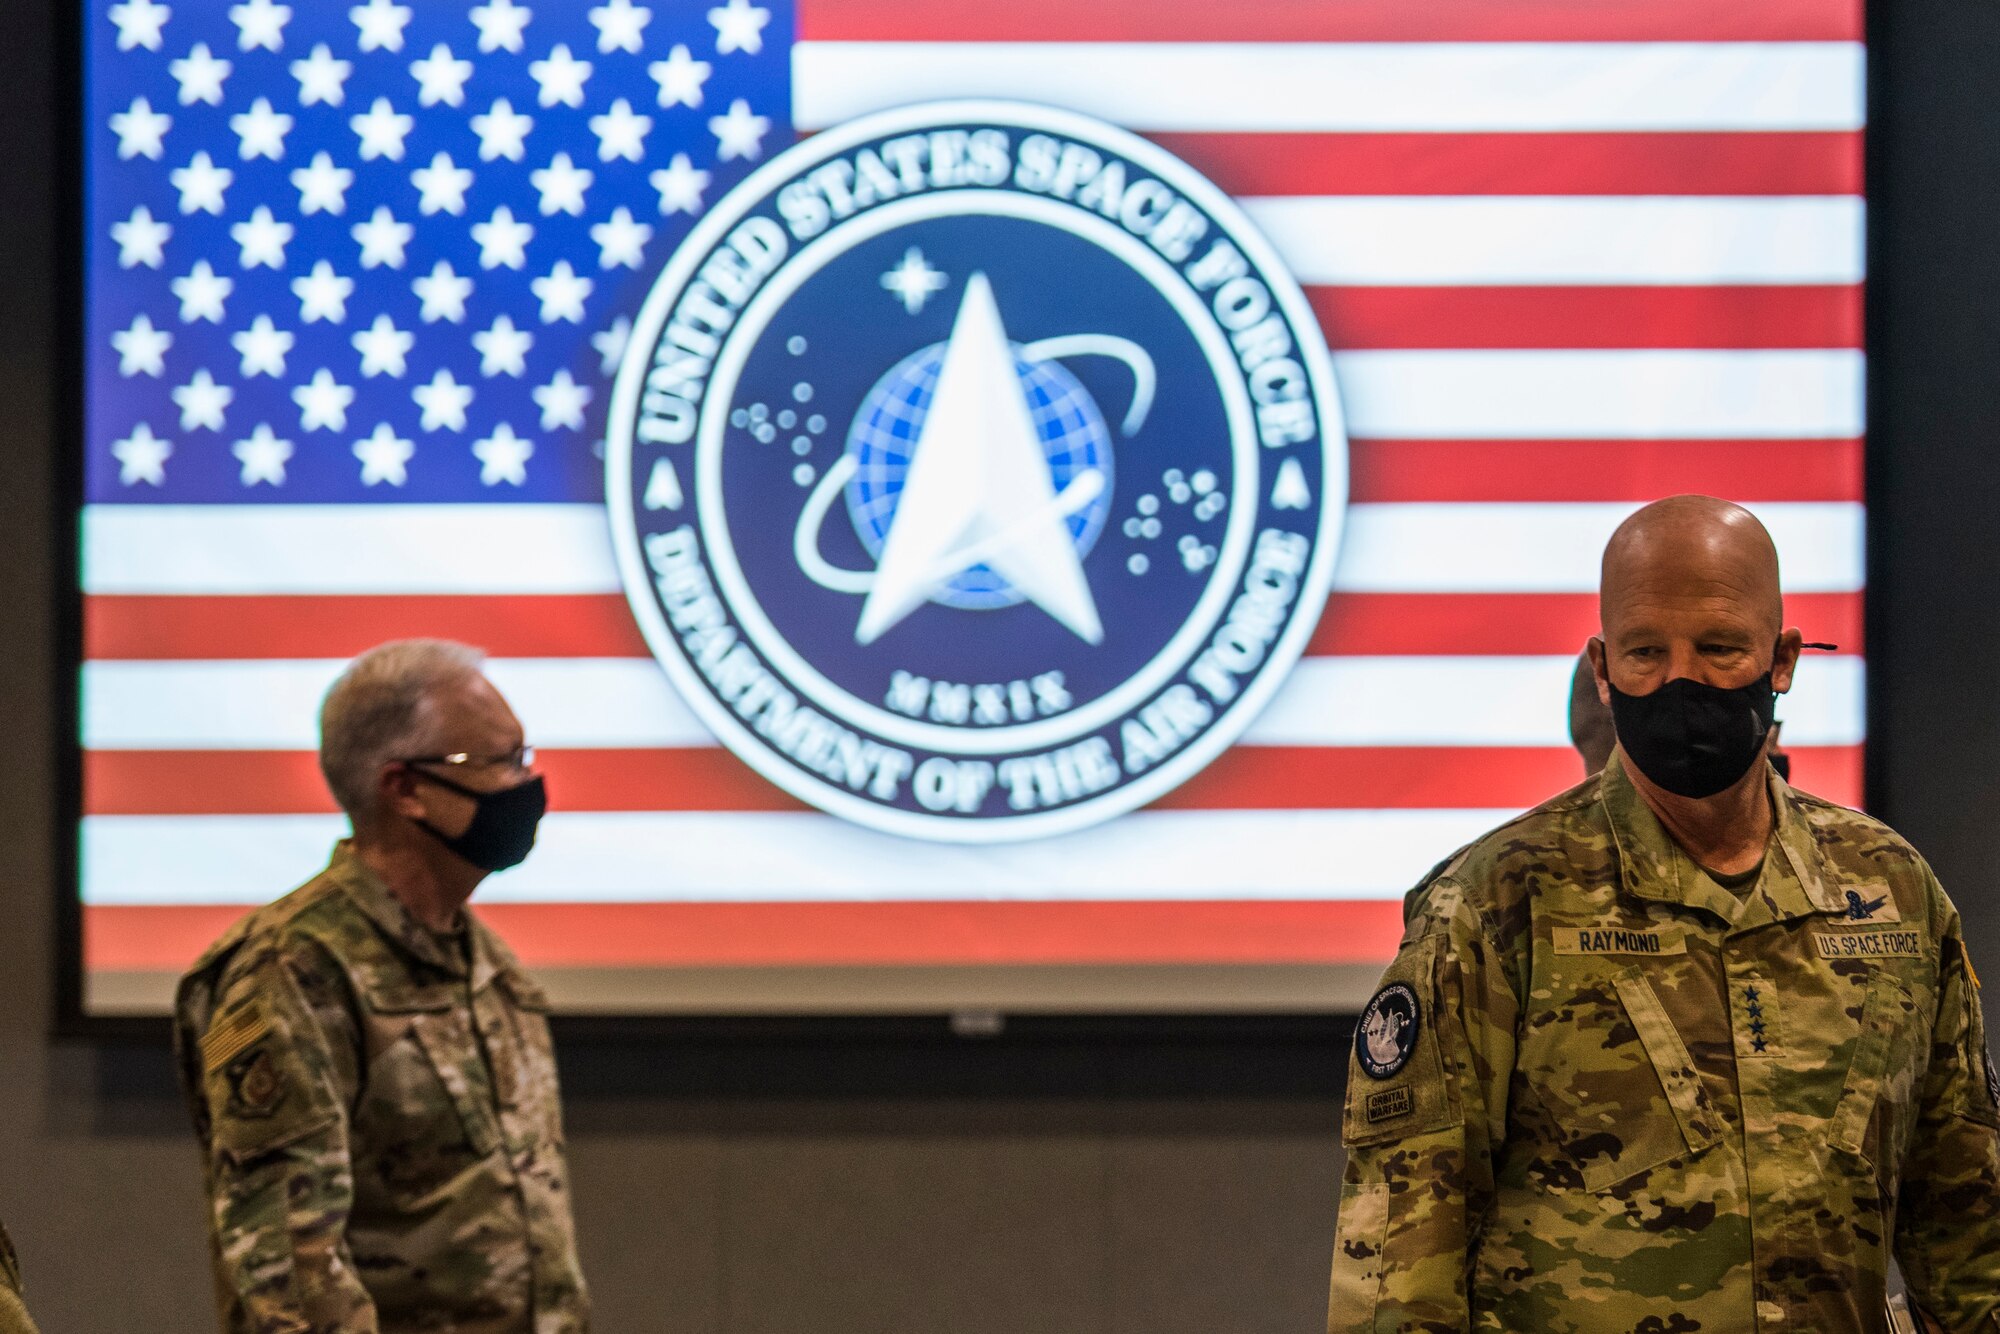 U.S. Space Force Gen. John W. “Jay” Raymond, Chief of Space Operations, right, and U.S. Air Force Lt. Gen. John F. Thompson, Space and Missile Systems Center commander and Program Executive Officer for Space, walk into the Gordon Conference Center prior to a Senior Leader Summit at Los Angeles Air Force Base, California, April 7, 2021. Now in its second year since establishment, the U.S. Space Force and its leaders are focusing on integrating the service across the DoD, interagency, commercial industry, and allies and partners, as well as speeding up acquisitions to outpace competitors. (U.S. Space Force photo by Staff Sgt. Luke Kitterman)